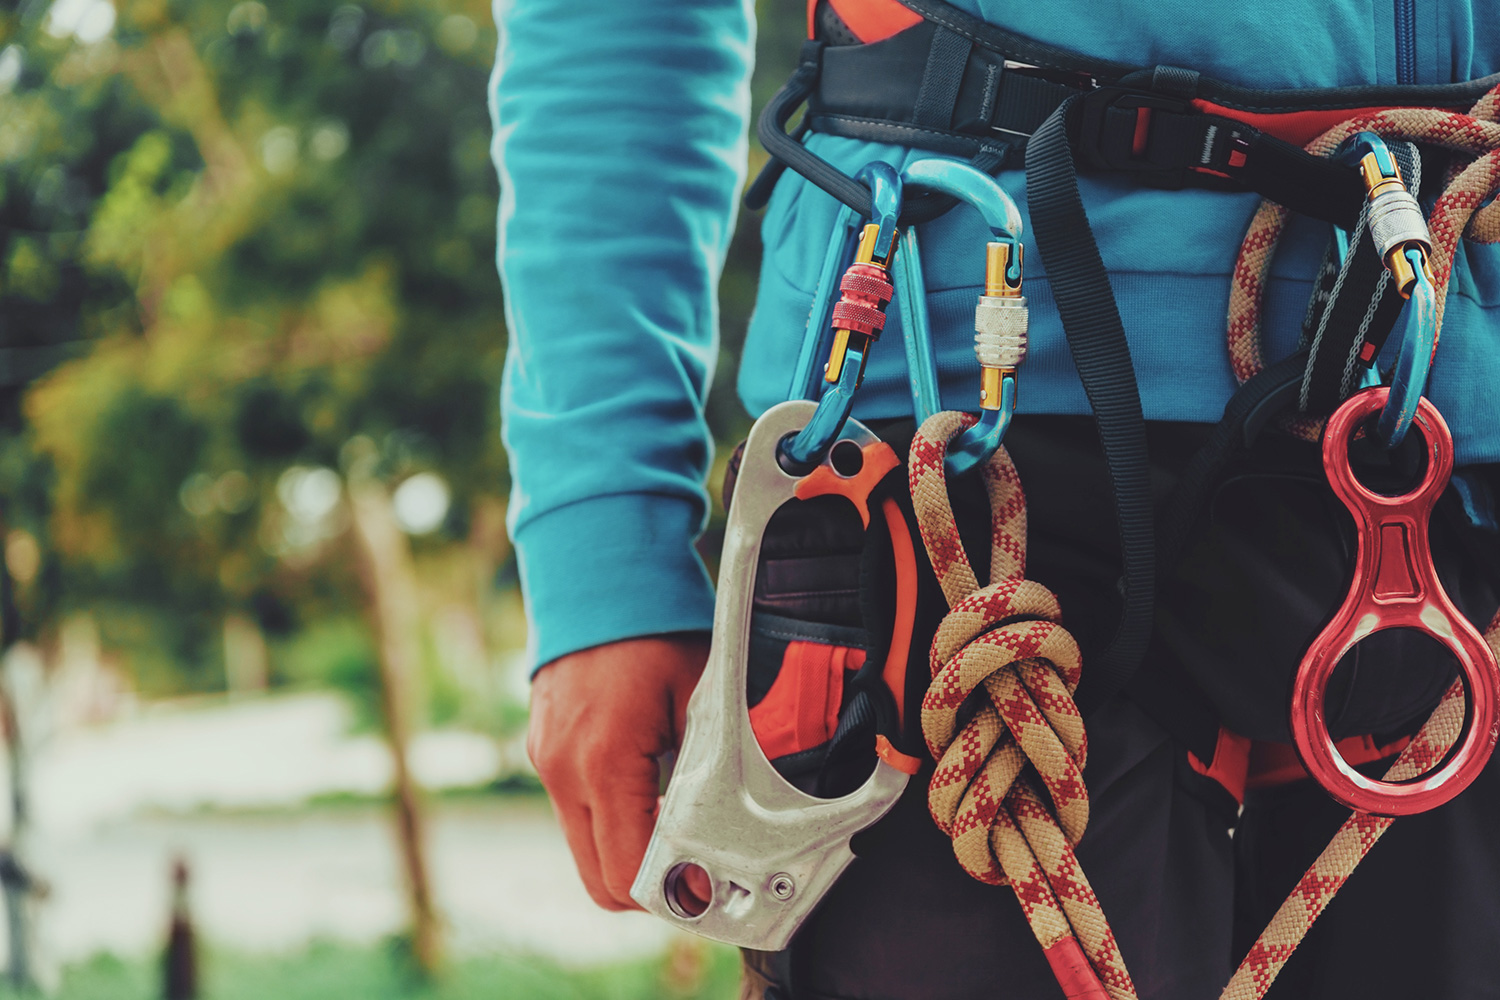 Indoor Rock Climbing Gear Guide: What You Need To Get Started | Digital ...